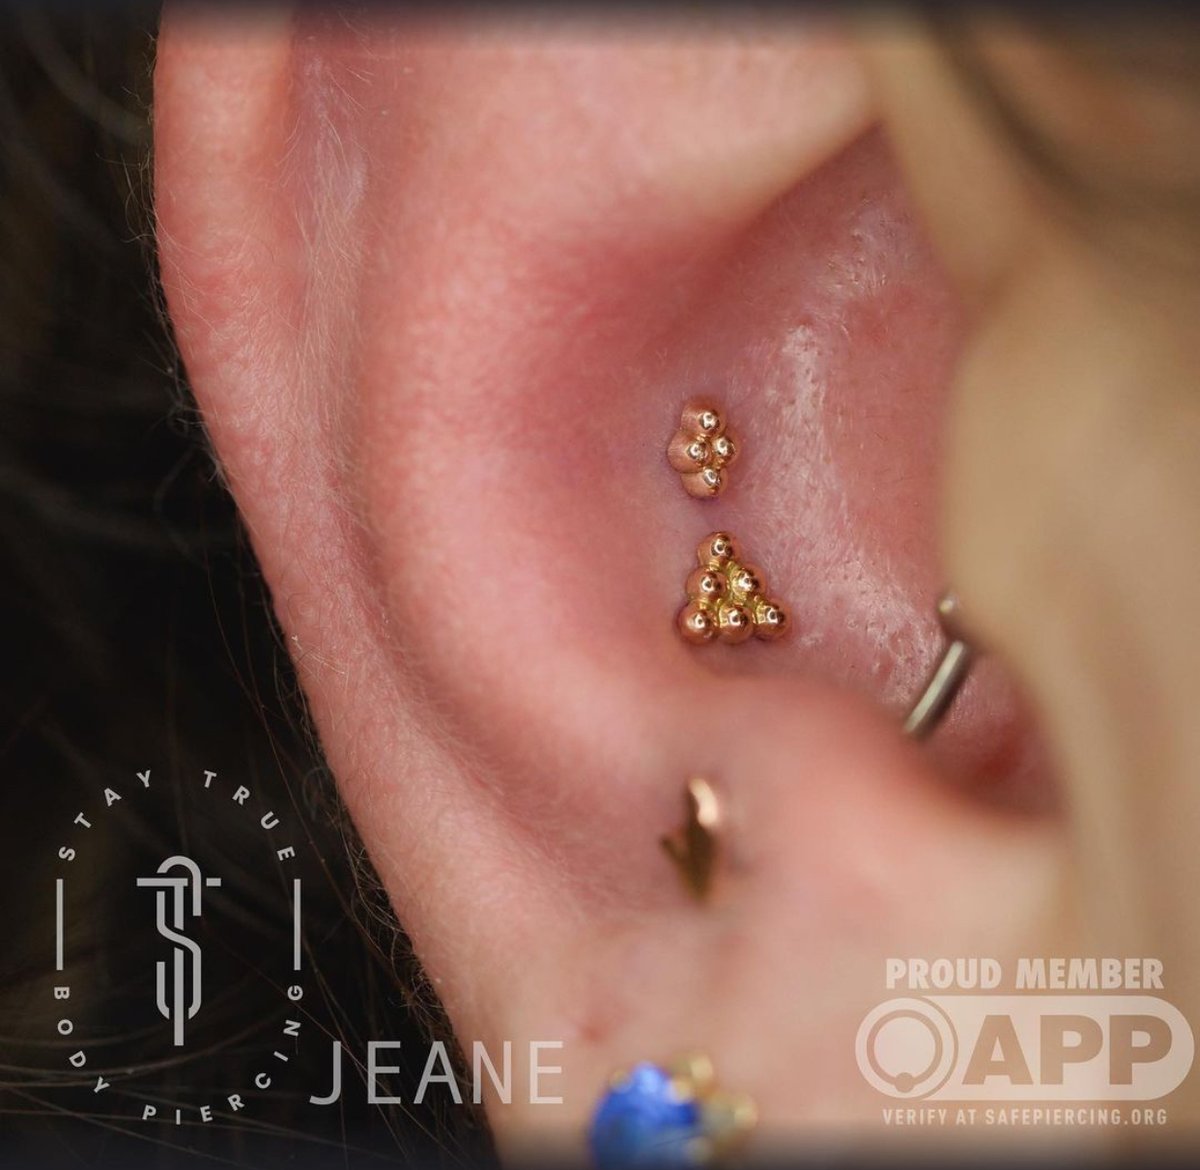 Add the perfect finishing touch to your look with our luxurious solid 18k gold Tri Bead Ends - an addition to your jewelry collection that will sparkle and shine in all the right places!

#anatometal #jewelry #gold #18k #piercing #bodypiercing #safepiercing #madeinsantacruz